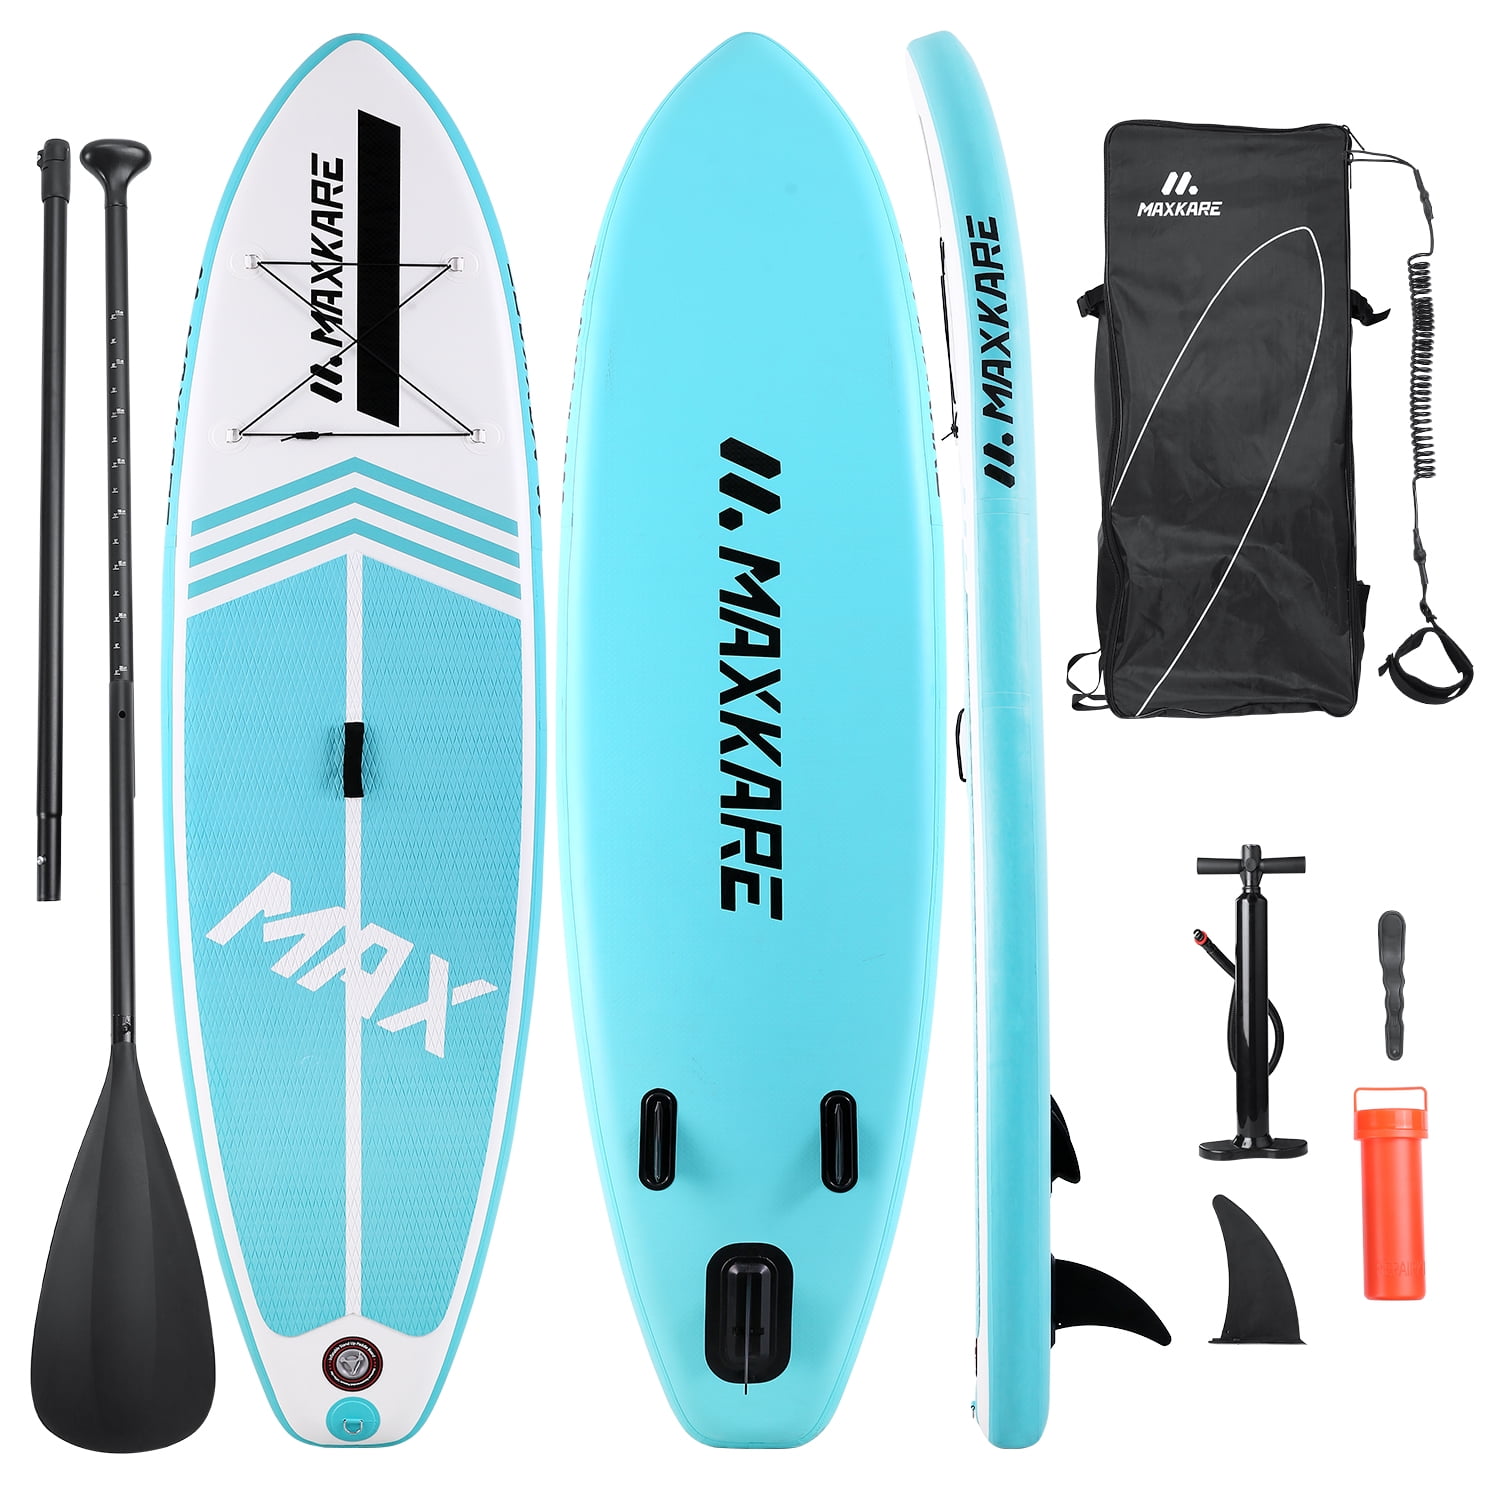 Spomchery Inflatable Stand Up Paddle Board，Paddle Boards for Youth Yoga Board Sup Board Travel Board for Surfing with Free Premium Sup Accessories Backpack Non-Slip Deck Leash Paddle and Hand Pump 